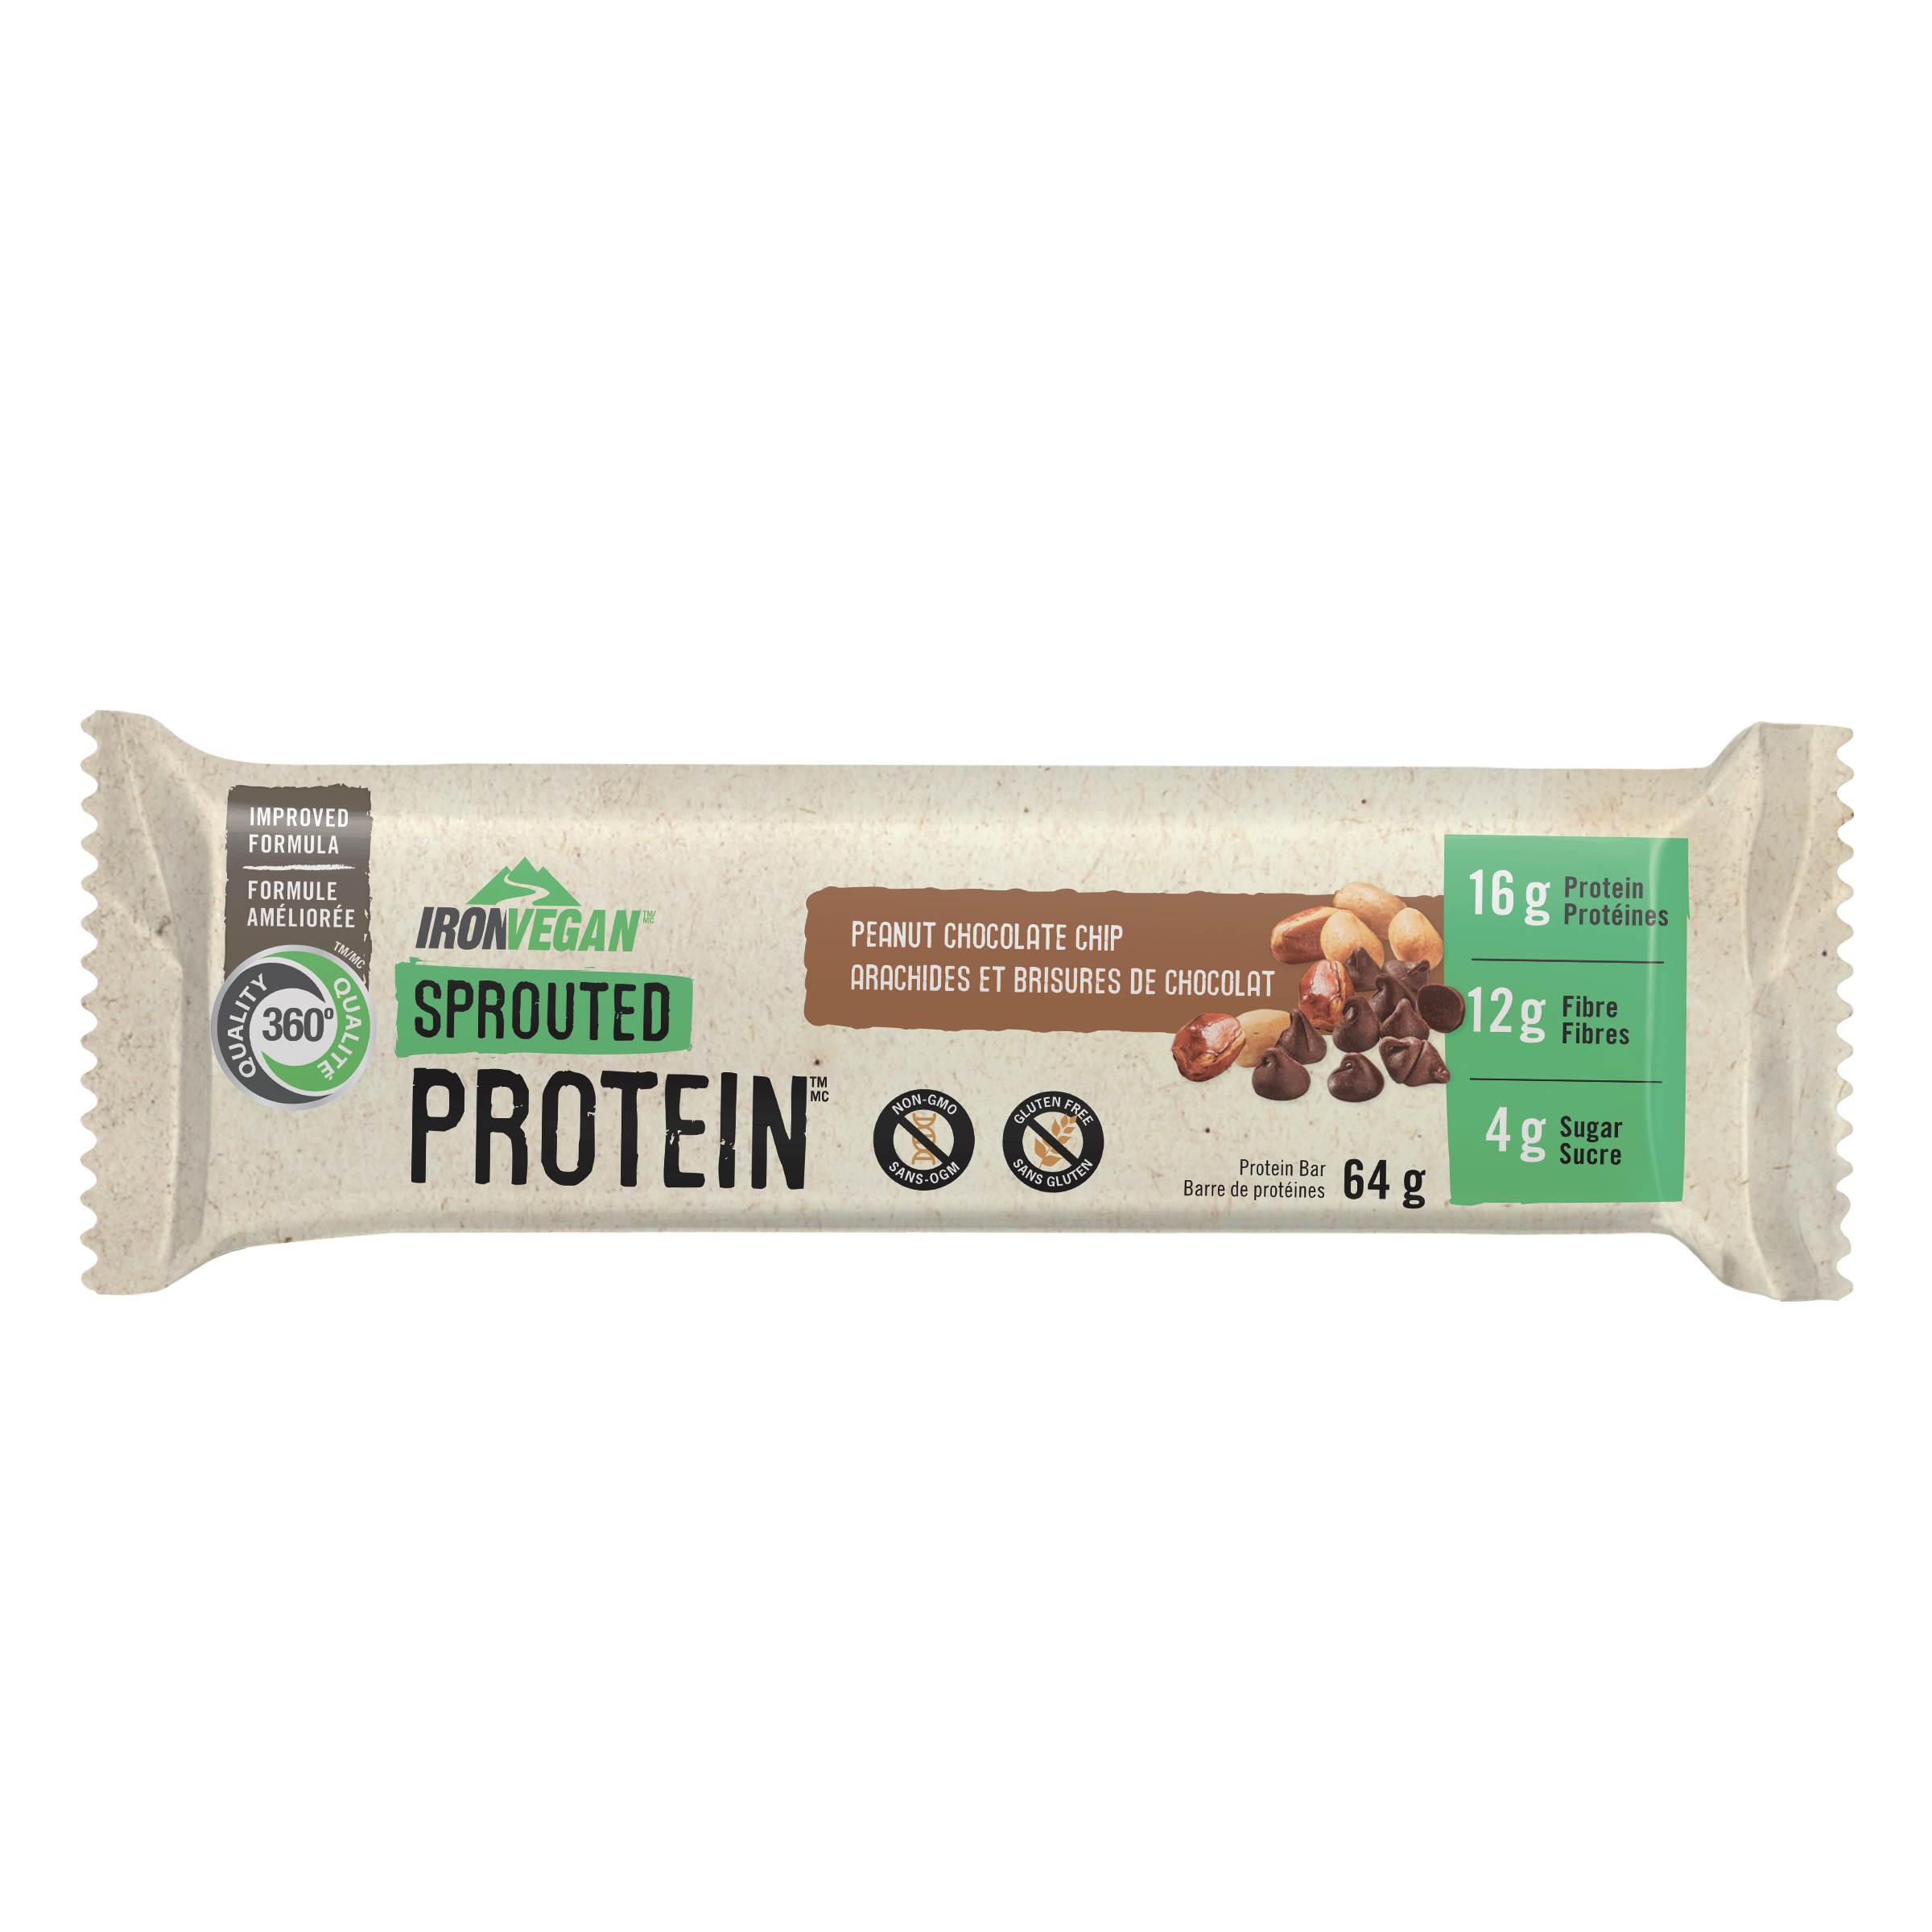 9031_V6_IV_SproutedProtein_PeanutChocolate_64g_WRP